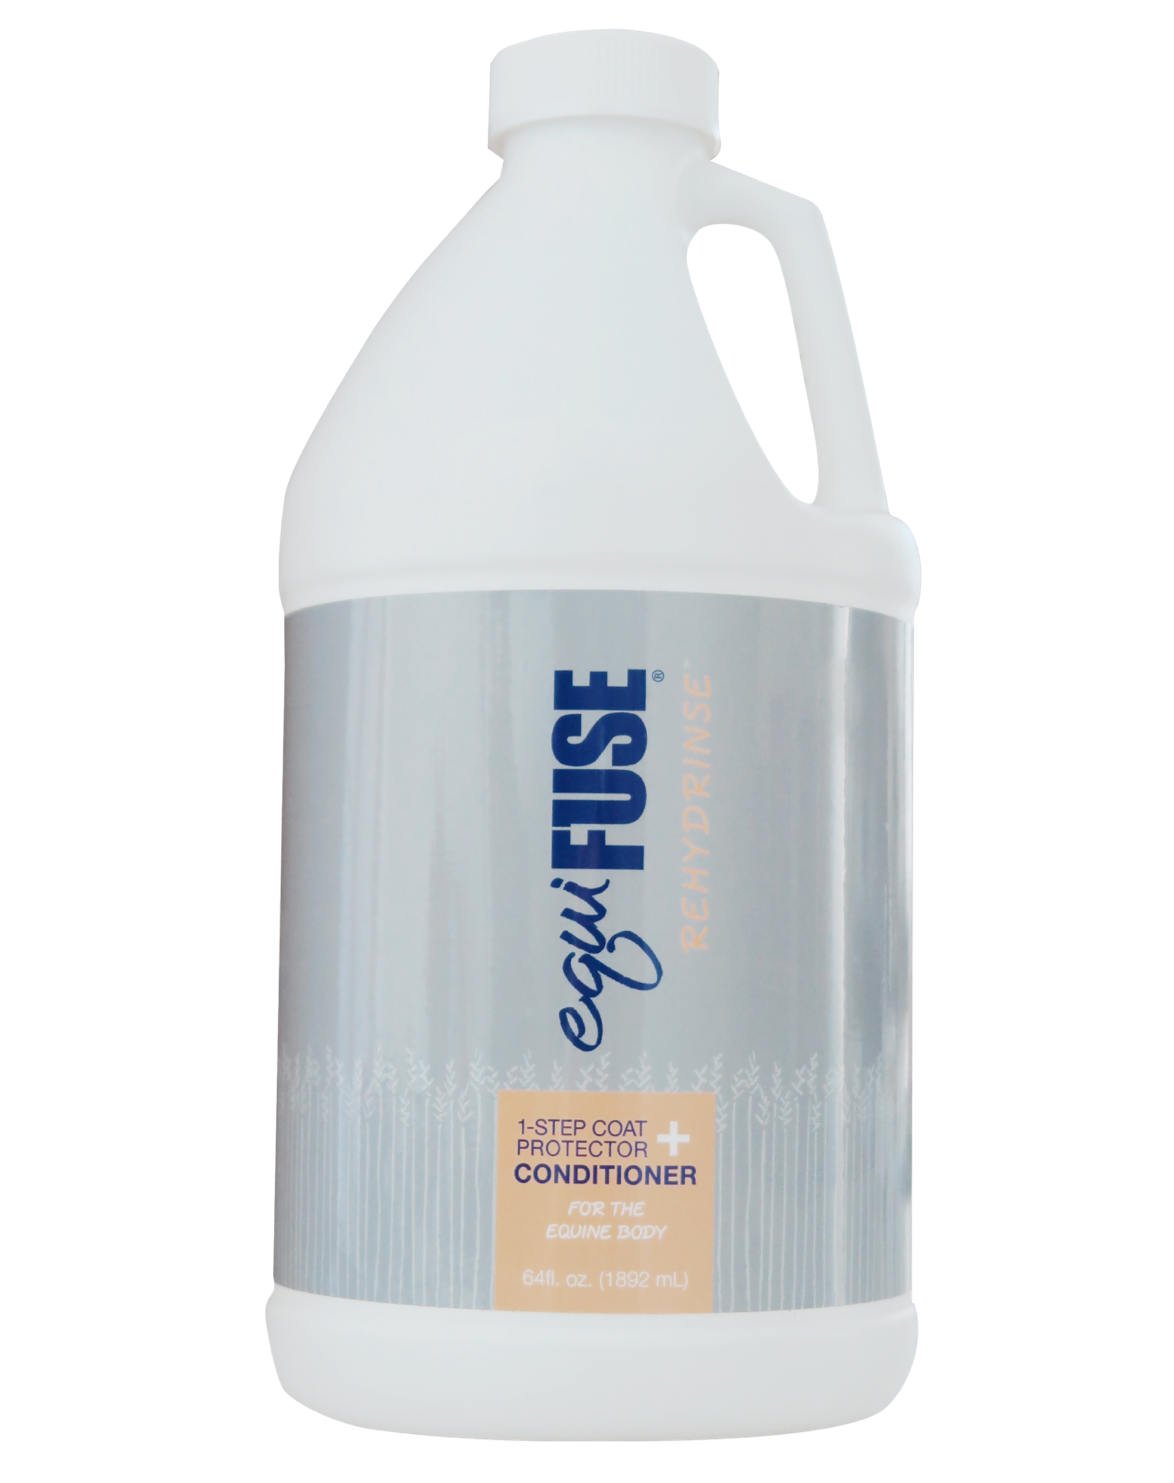 Rehydrinse™ 1-Step Coat Protector + Conditioner 64 oz